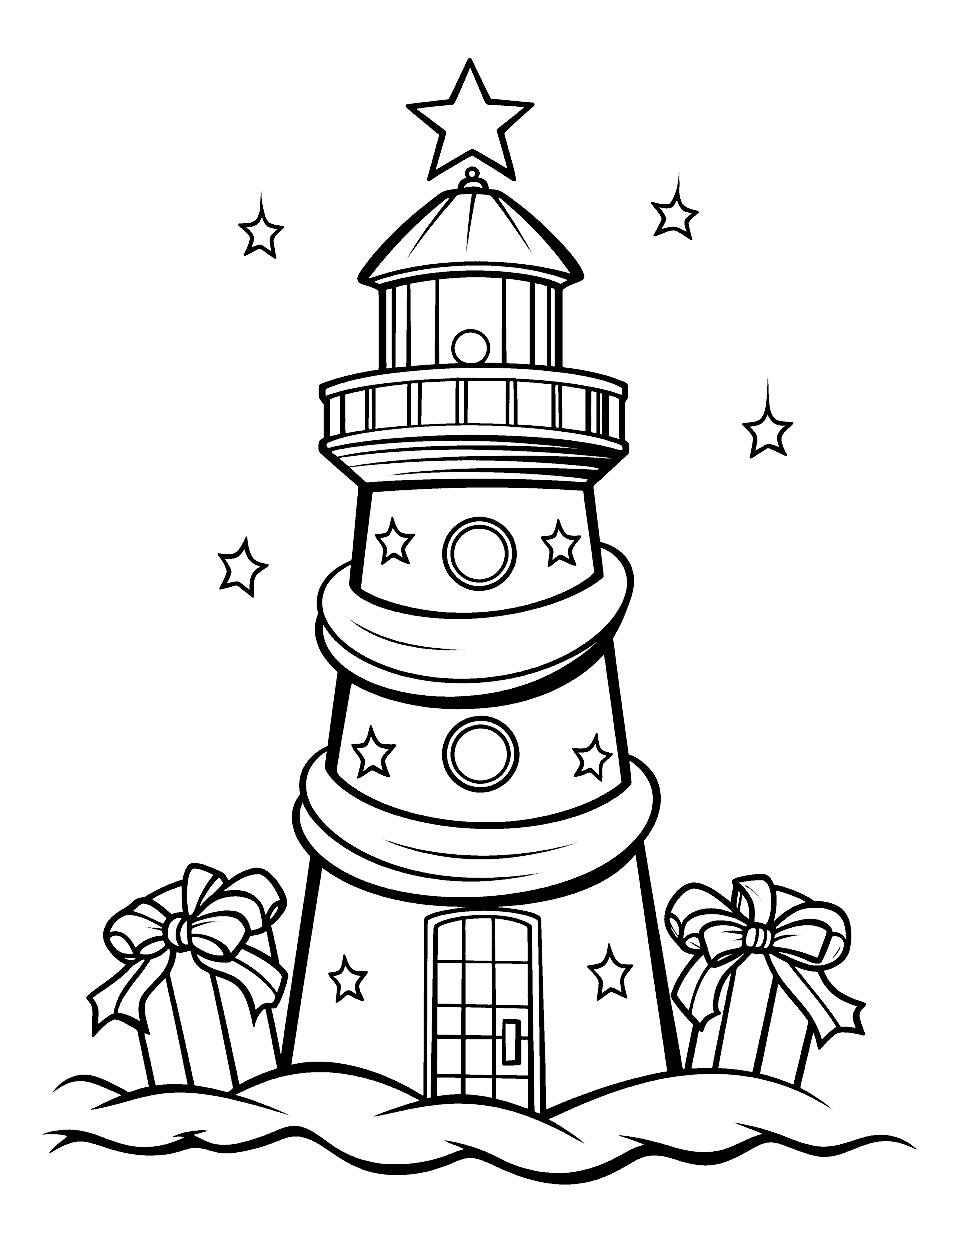 Holiday Lighthouse Christmas Coloring Page - A lighthouse decked out in holiday lights.